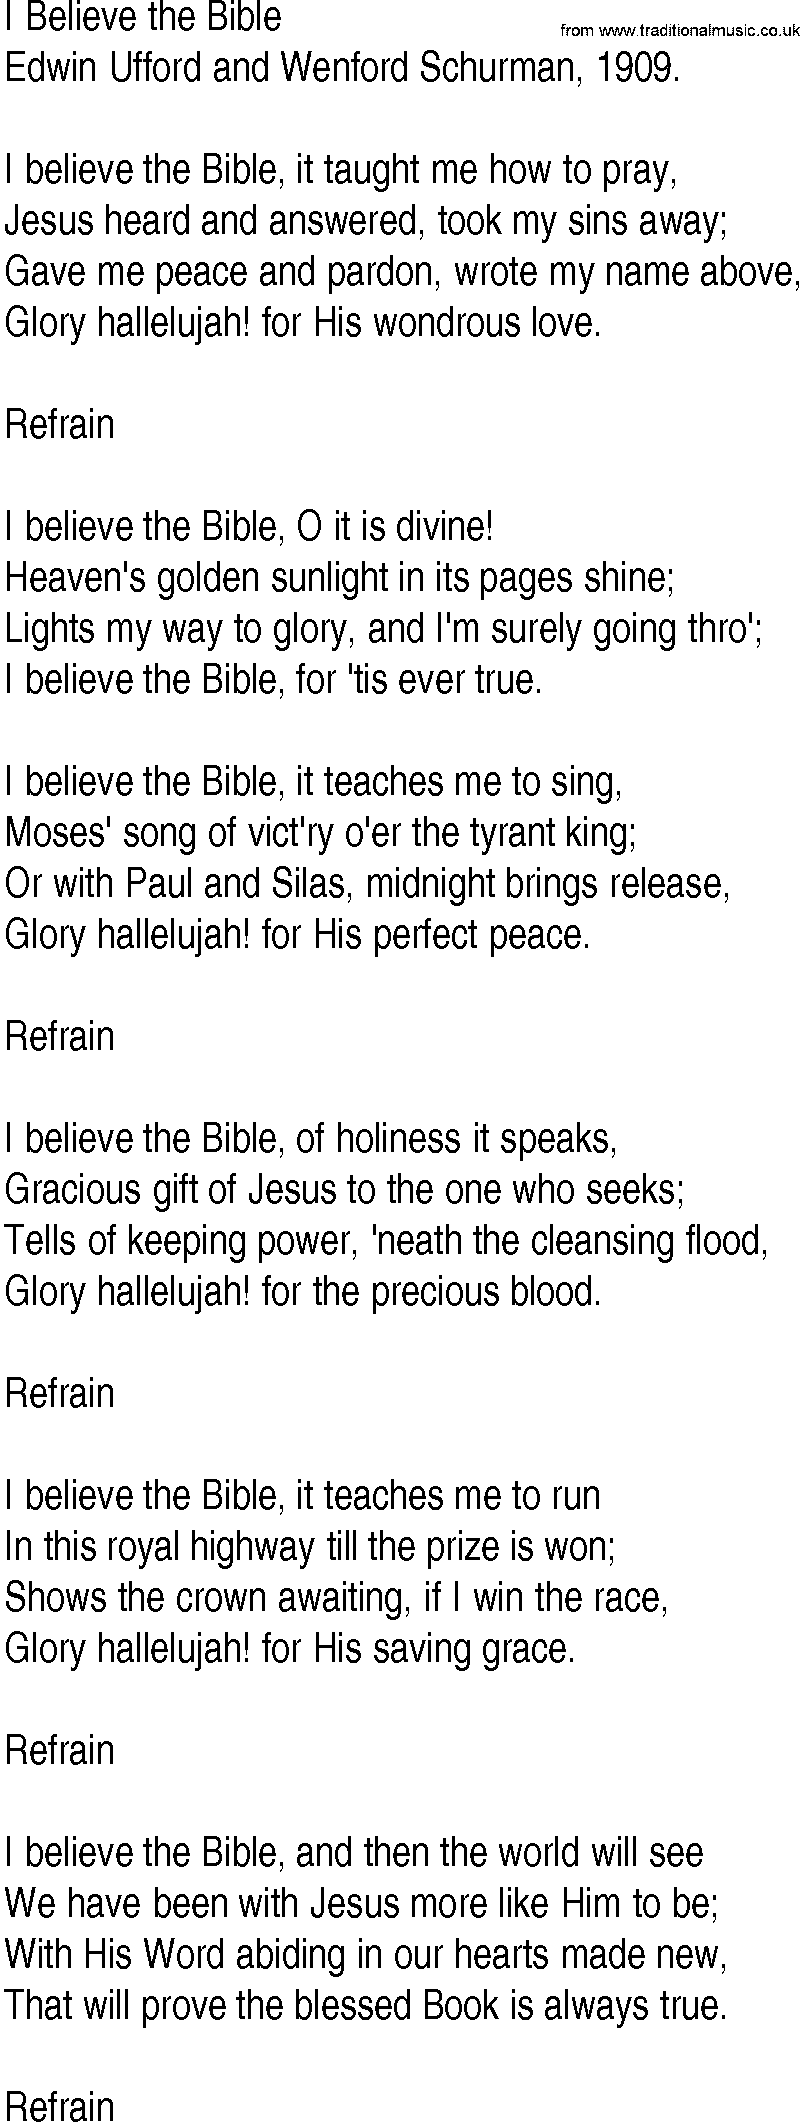 Hymn and Gospel Song: I Believe the Bible by Edwin Ufford and Wenford Schurman lyrics